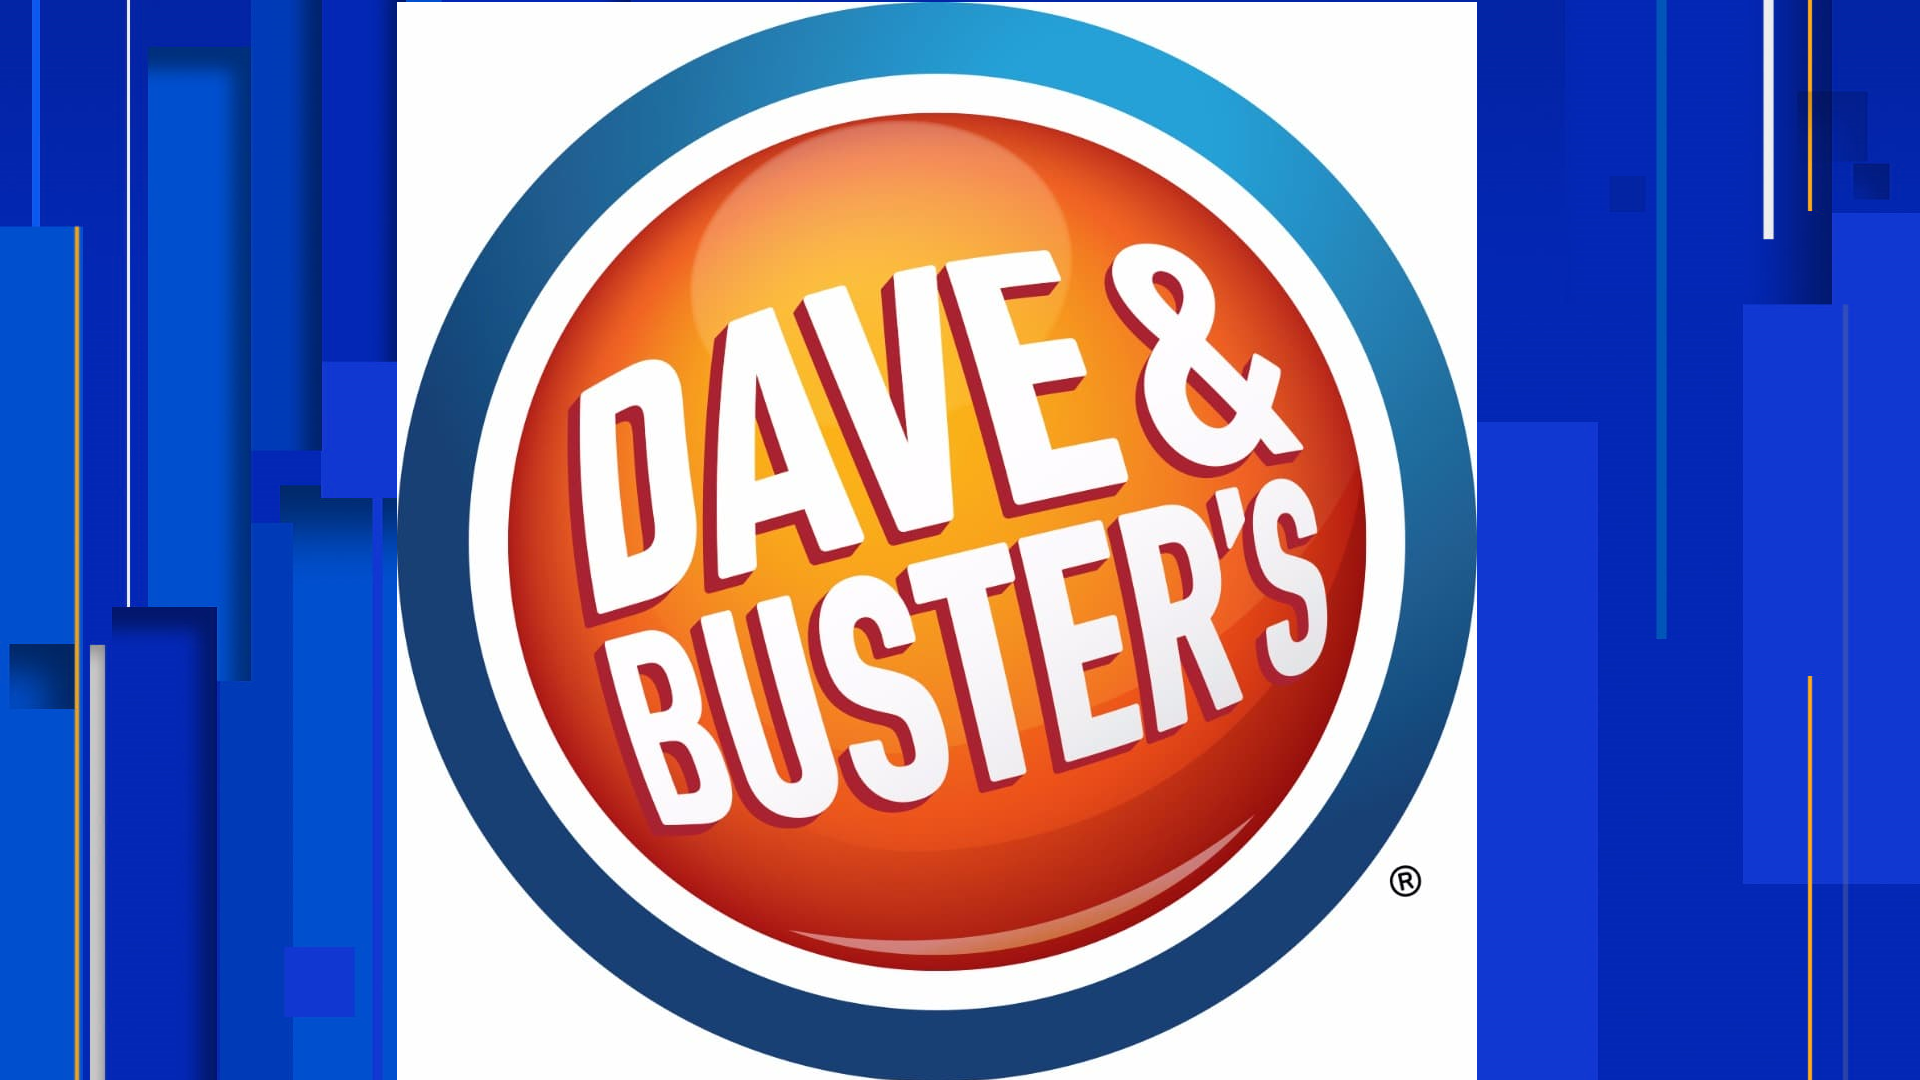 Dave & Buster's James 'Buster' Corley Suffered Stroke Months